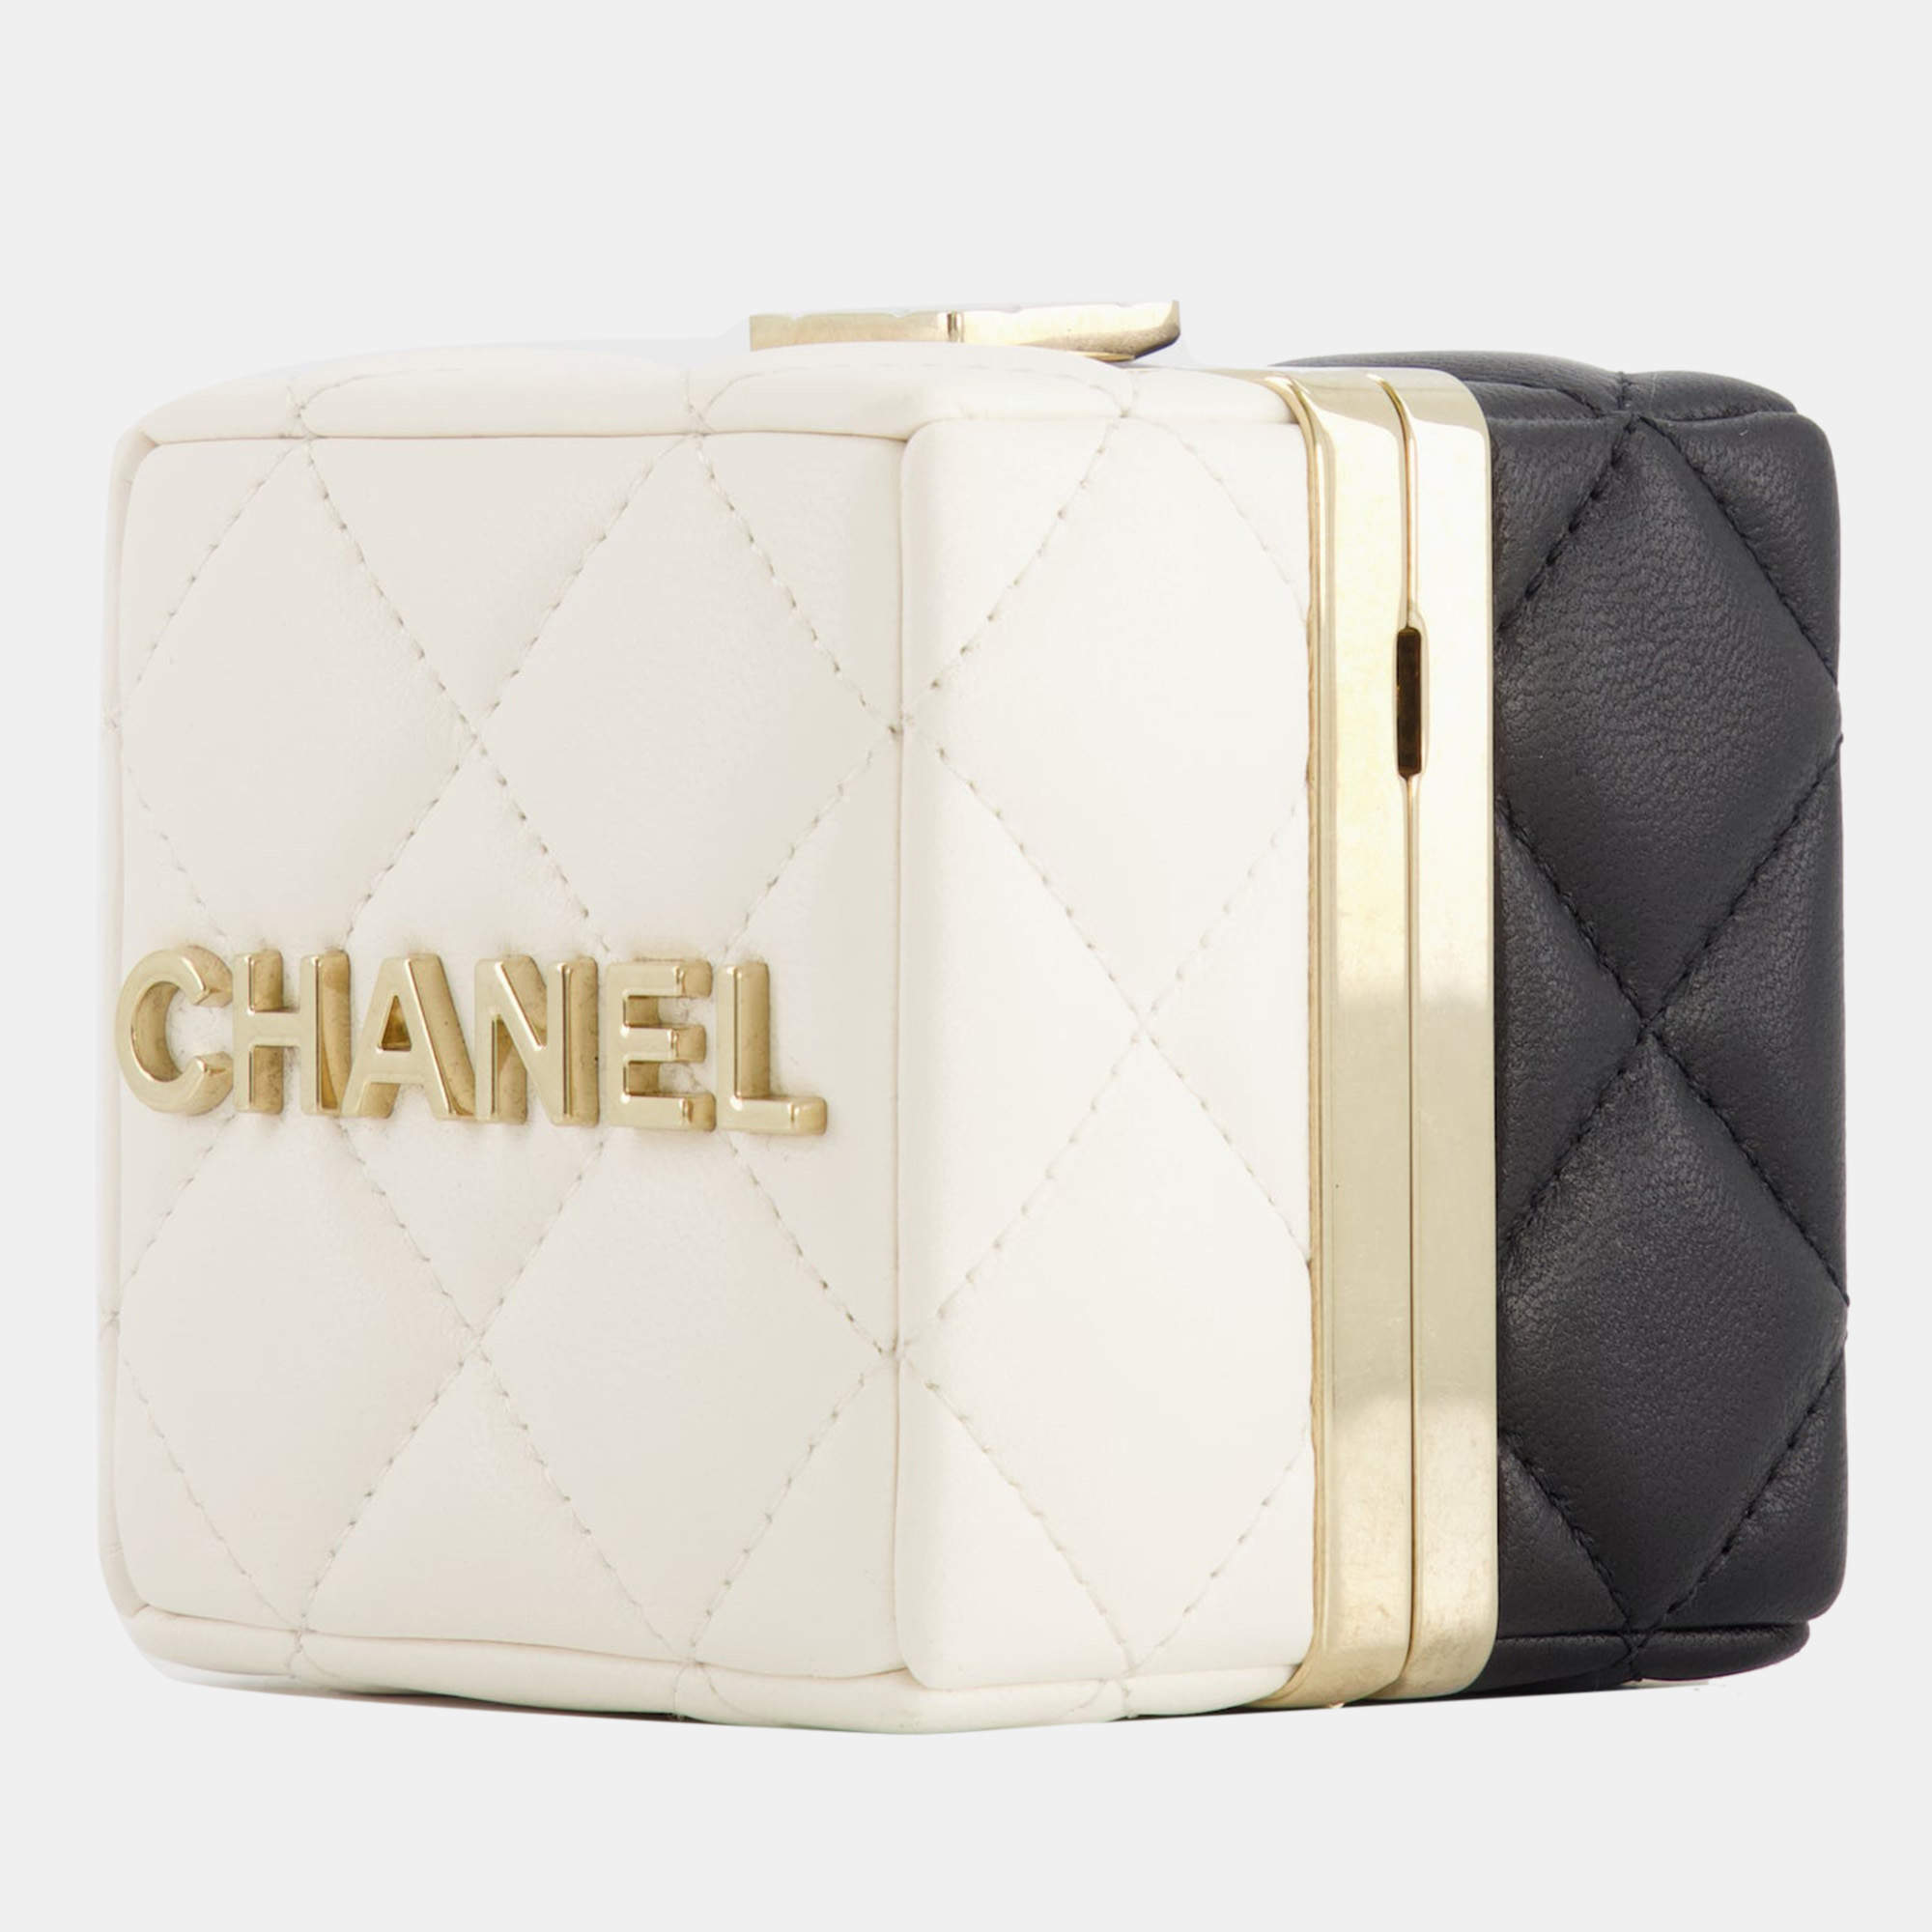 Chanel Black and White Micro Box Square Bag with Gold Hardware 